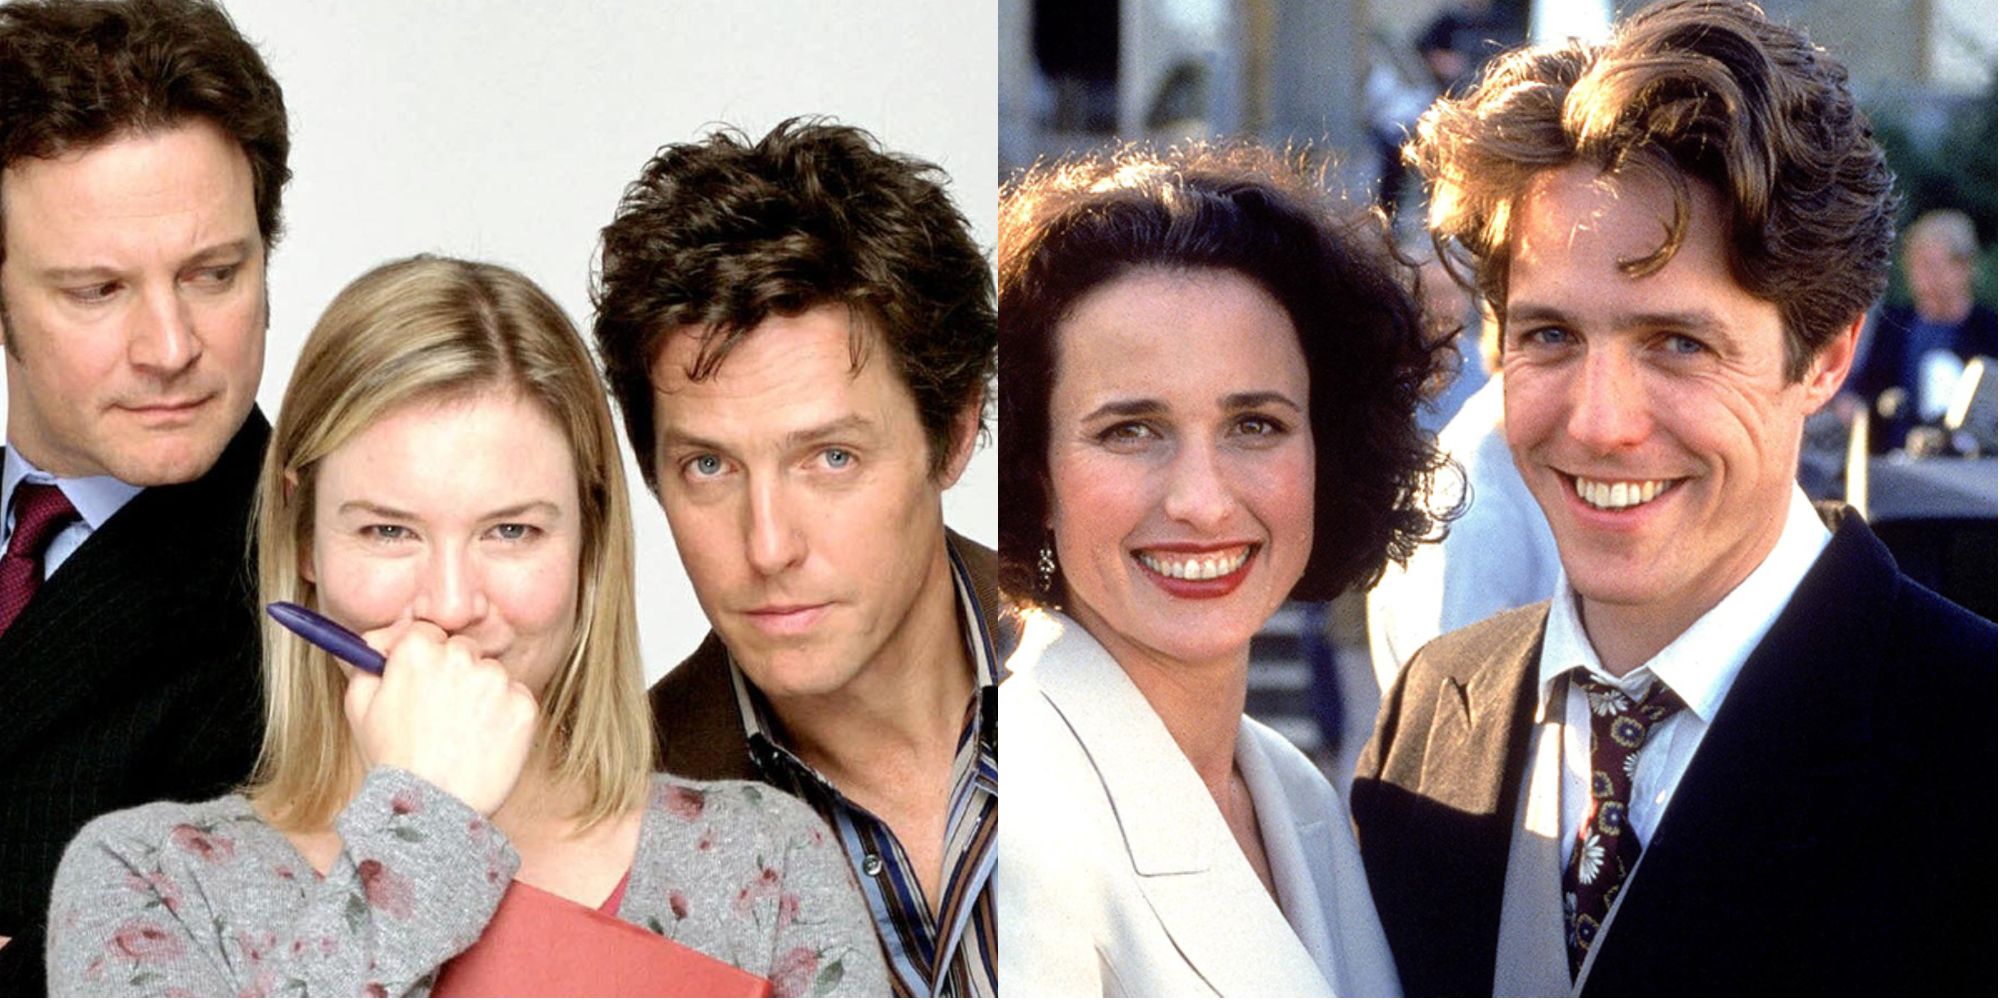 Split images of Hugh Grant with the cast of Bridget Jones's Diary and Hugh Grant with Andie MacDowell in Four Weddings and a Funeral